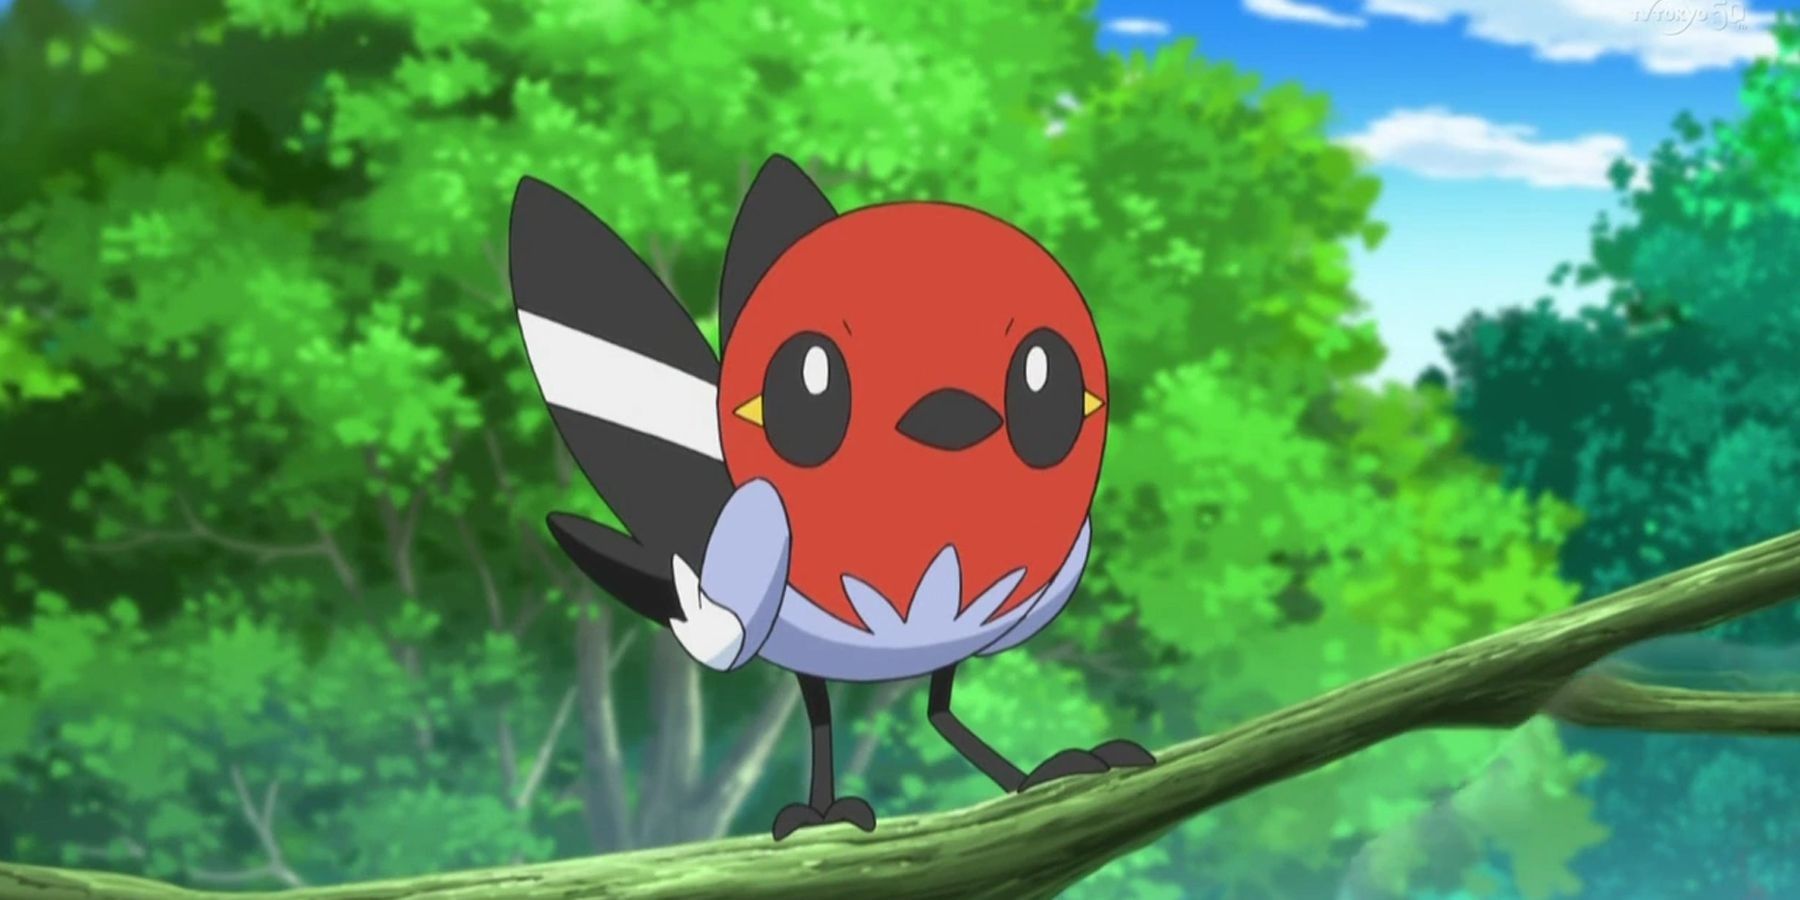 Fletchling standing on a branch in the Pokemon anime